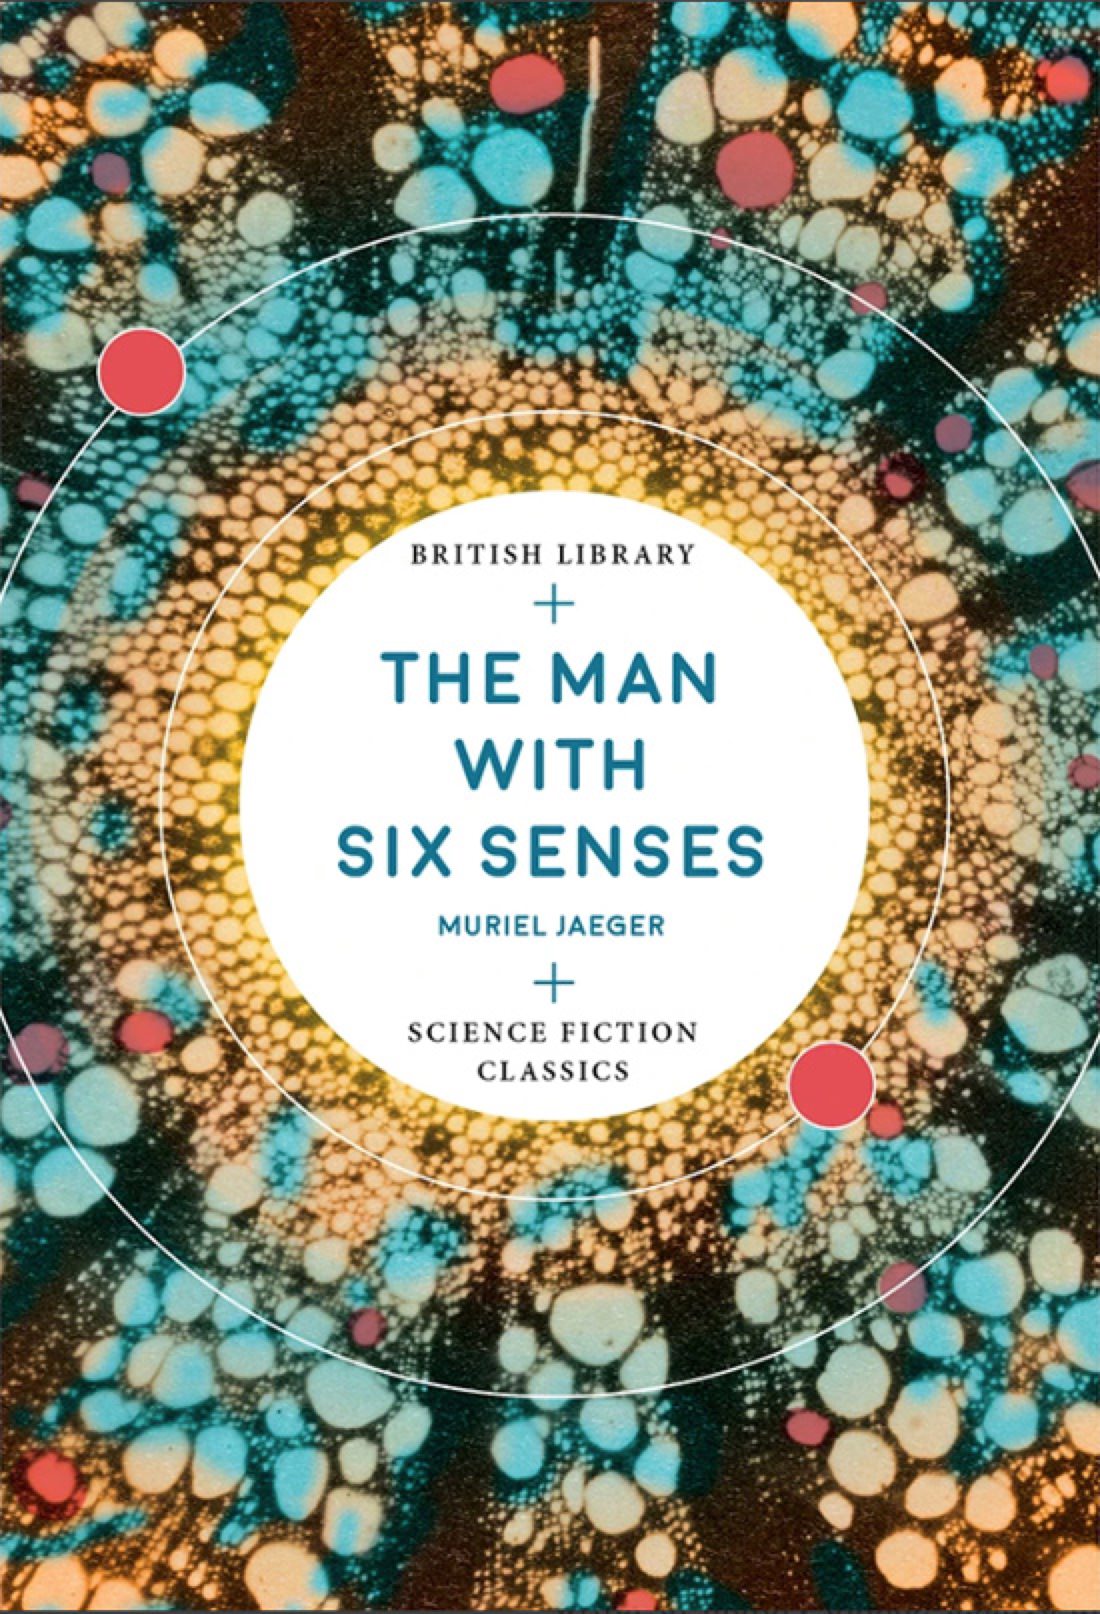 The man with six senses book